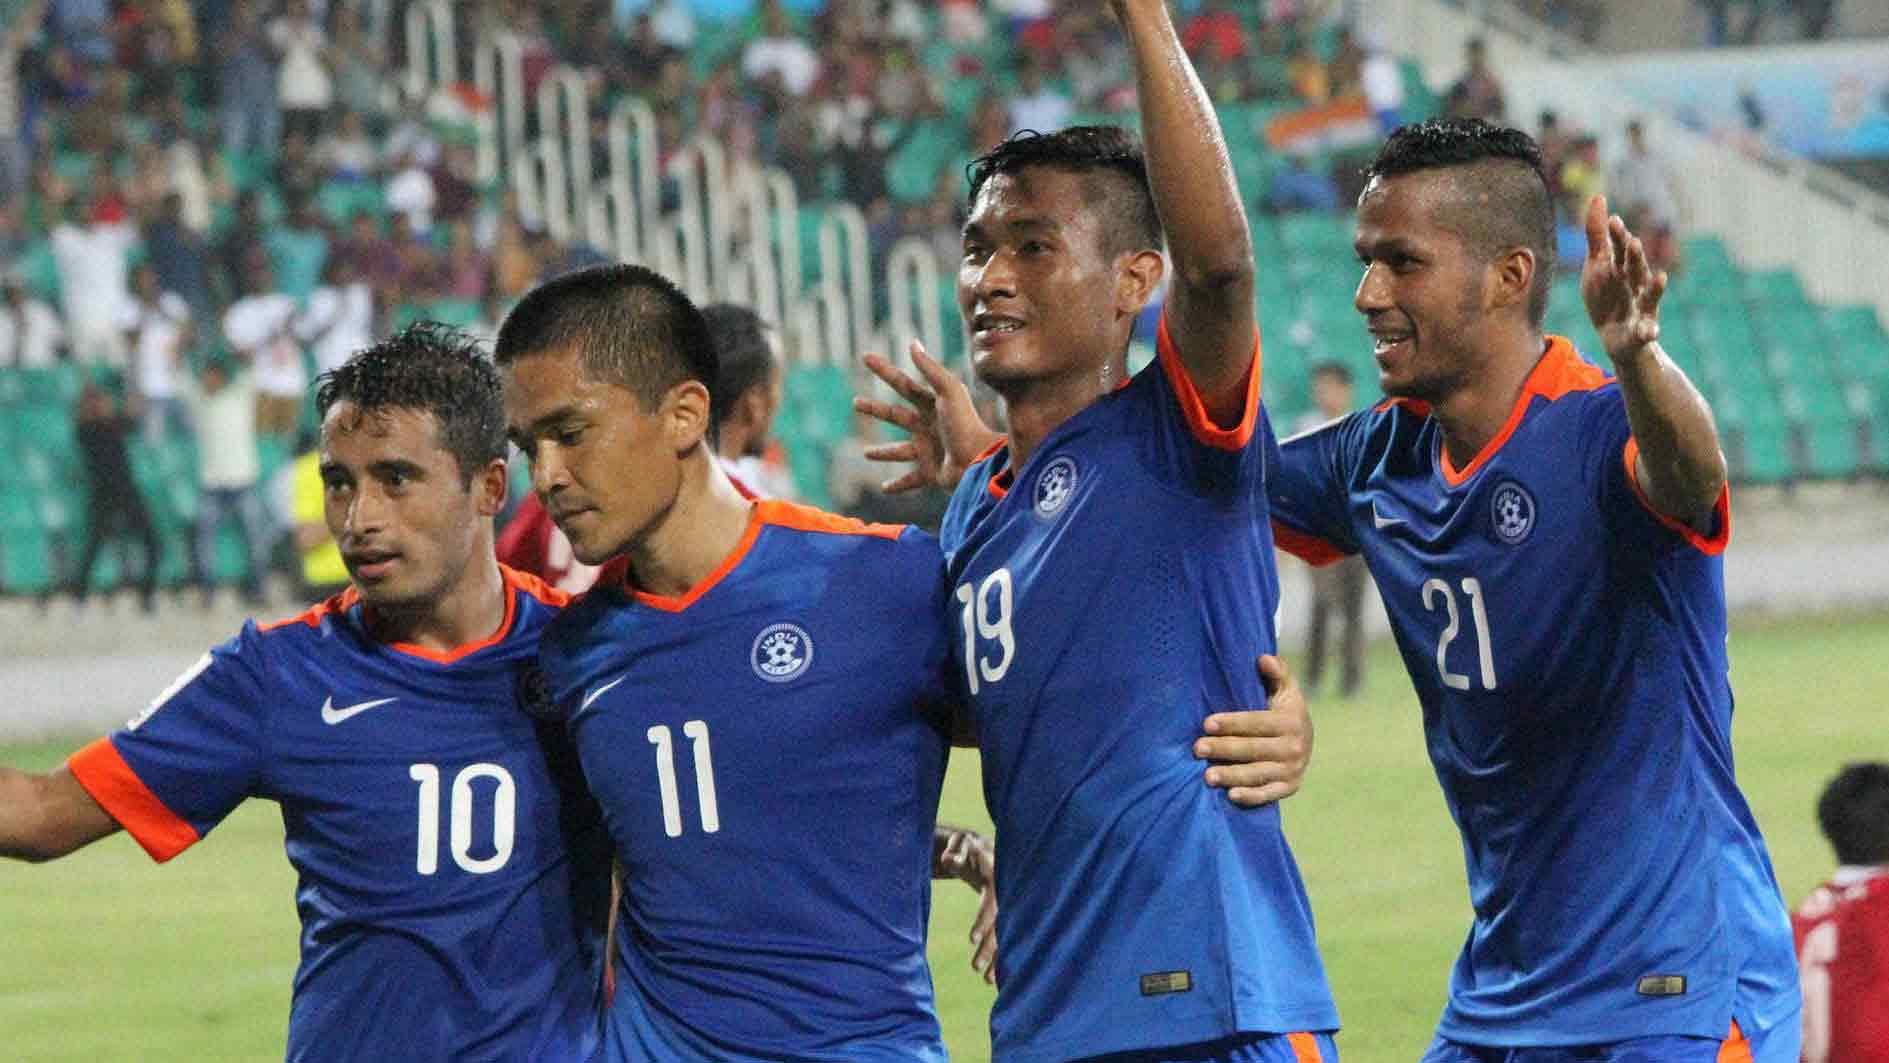 The Indian skipper Sunil Chhetri with his team-mates celebrate a goal in the group stage of the SAFF Cup. (Photo: PTI)